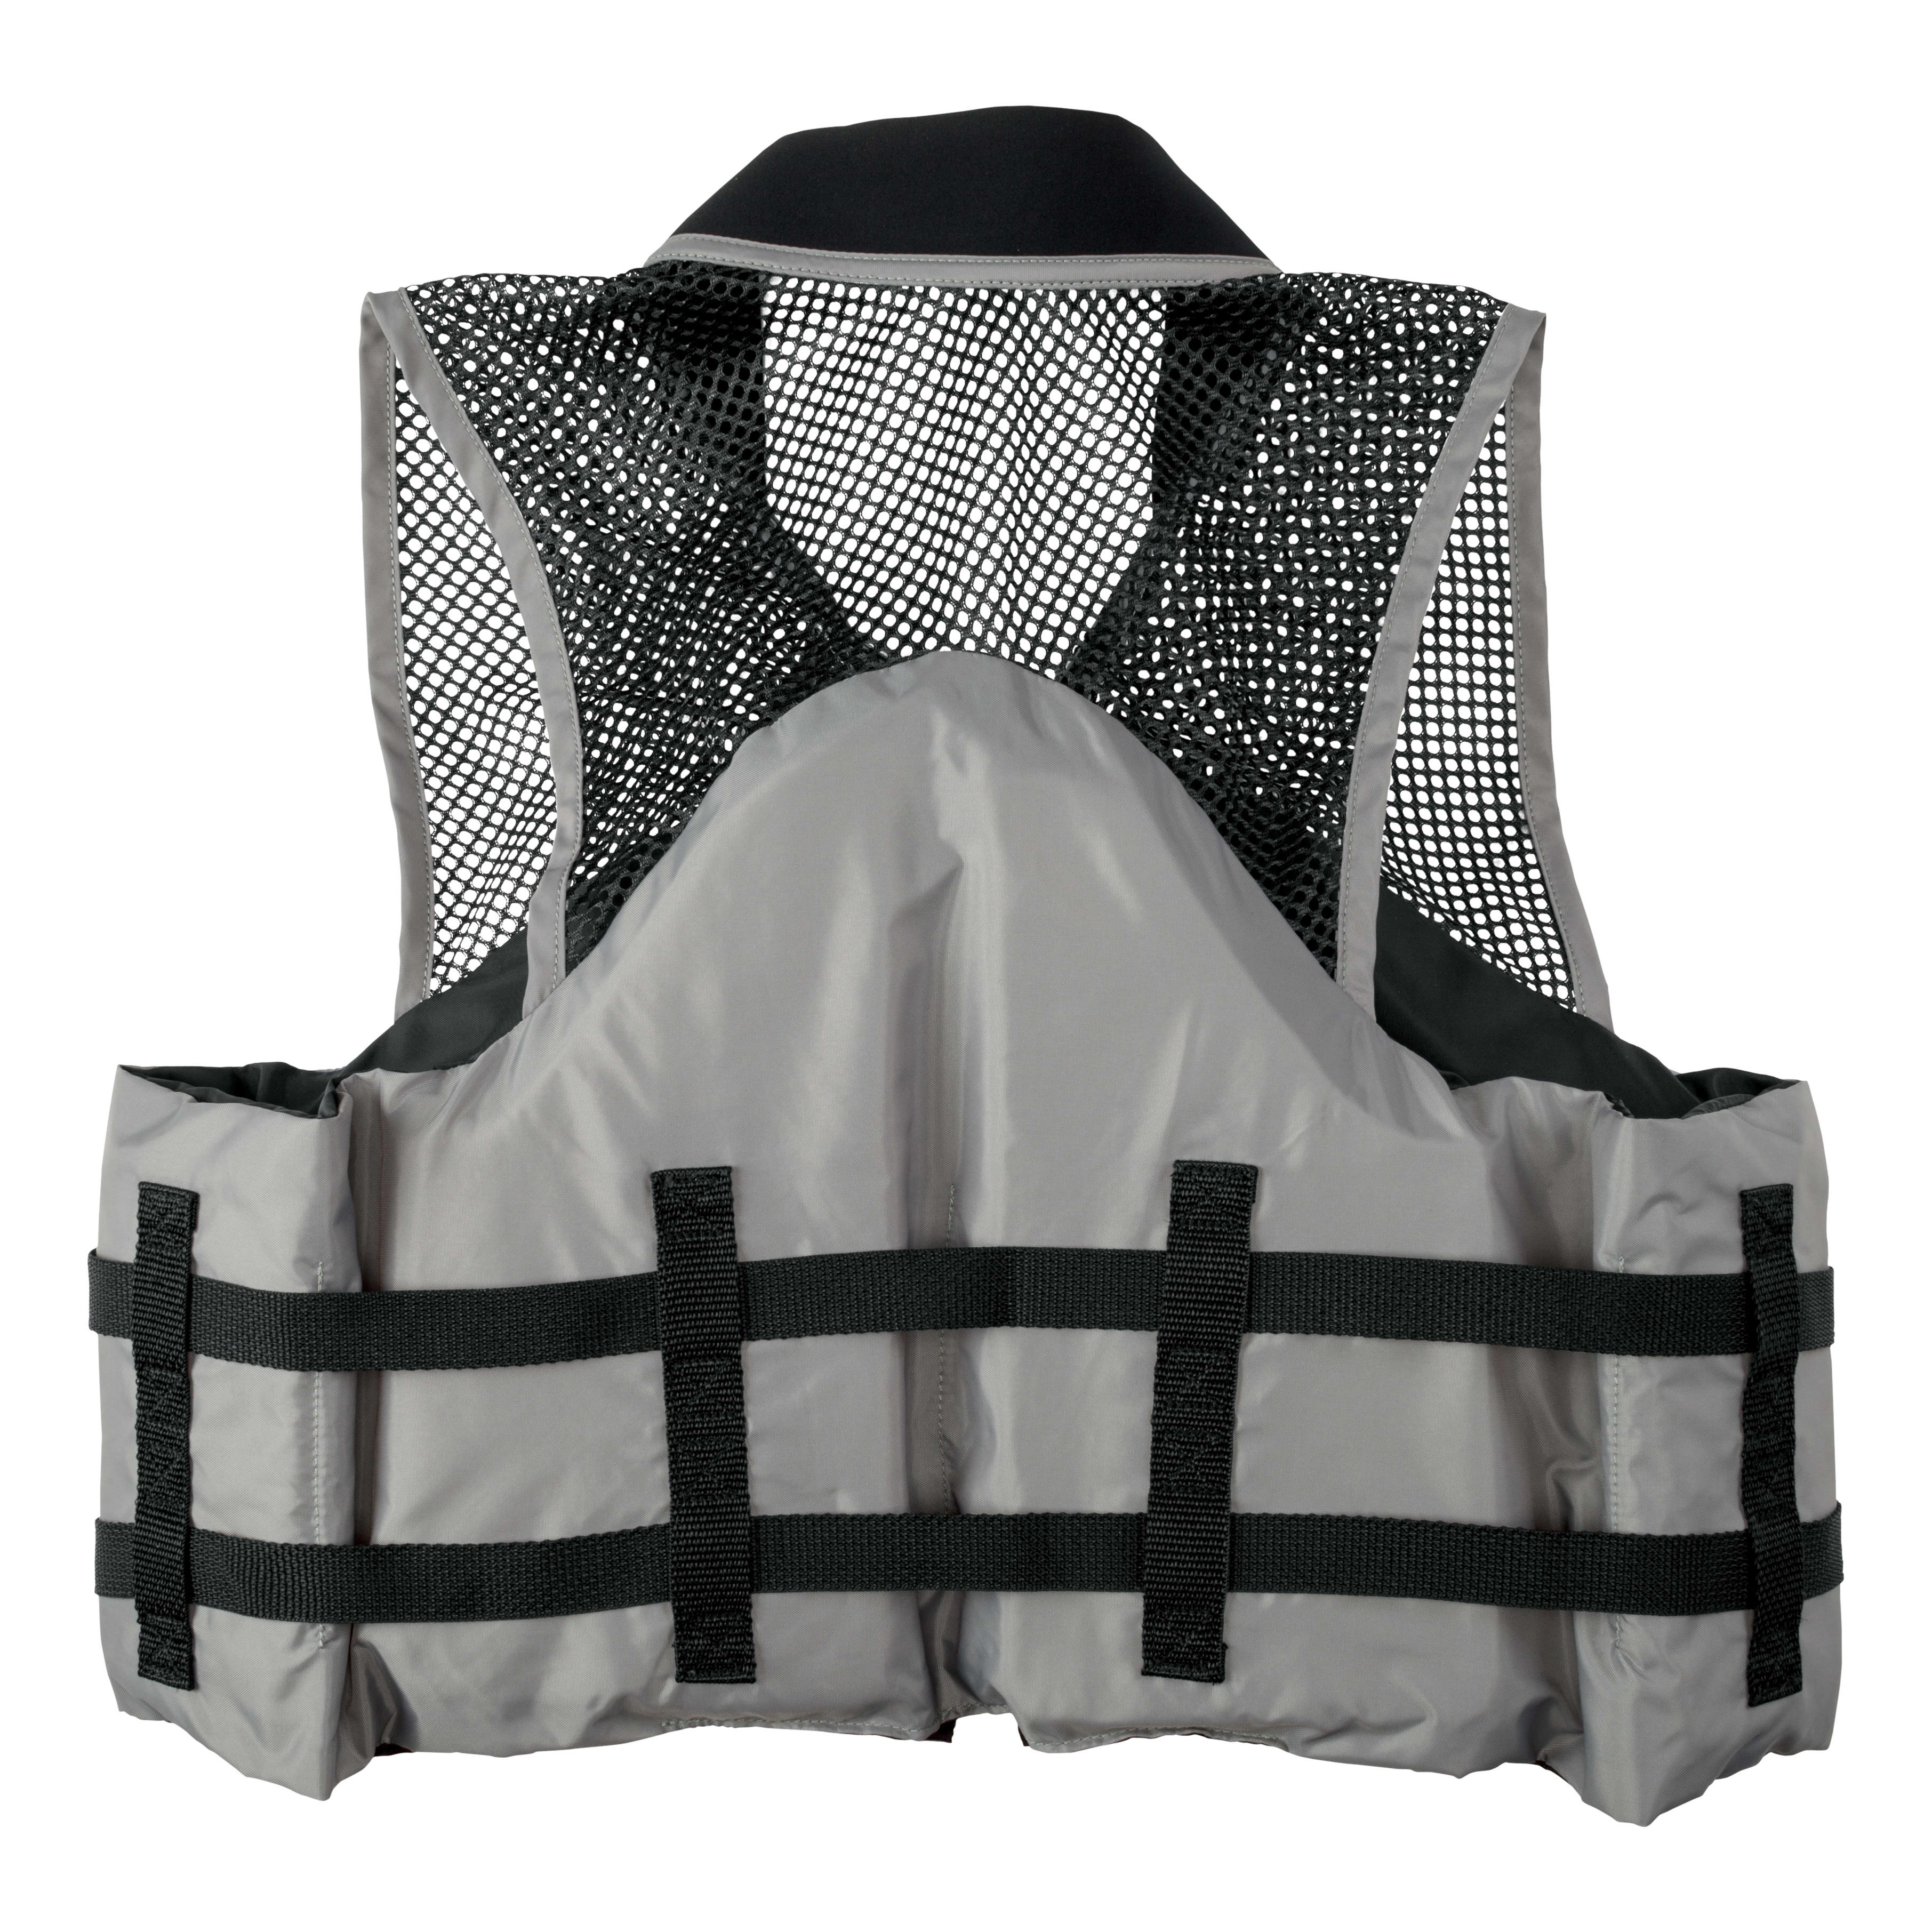 Bass Pro Shops® Deluxe Mesh Fishing Life Vest - Back View